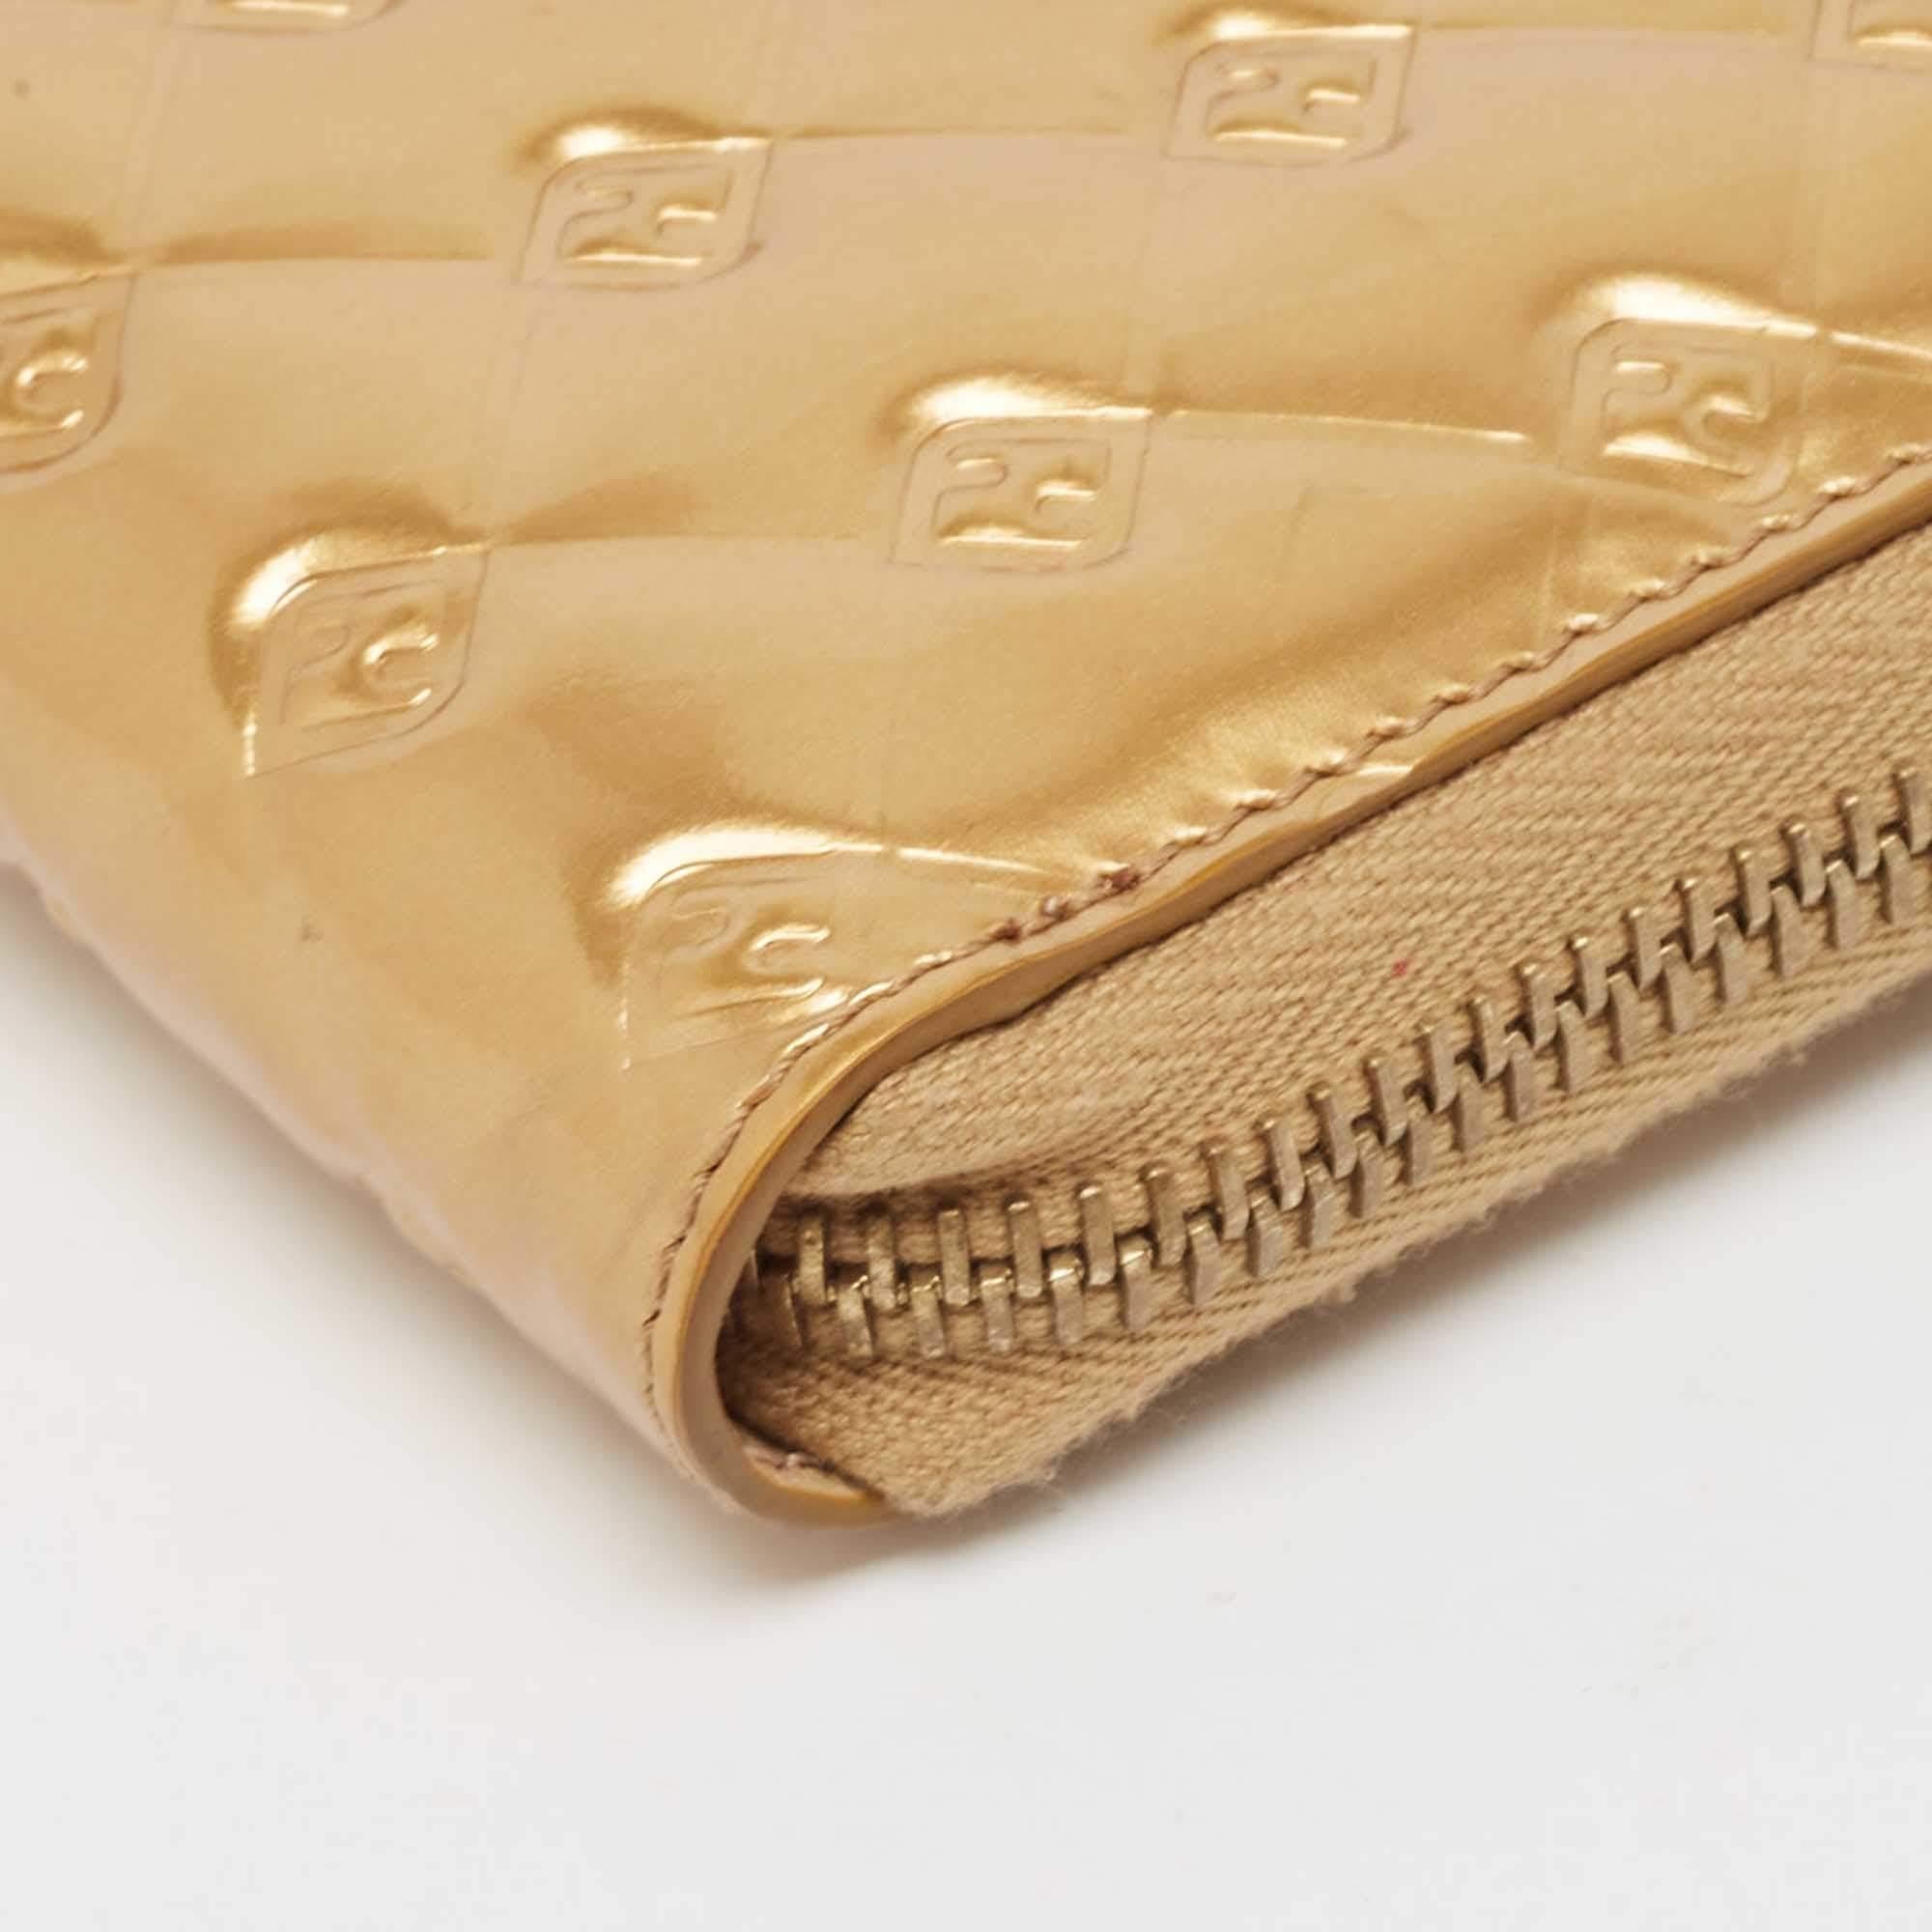 Fendi Gold Embossed Patent Leather Fendilicious Continental Wallet For Sale 10